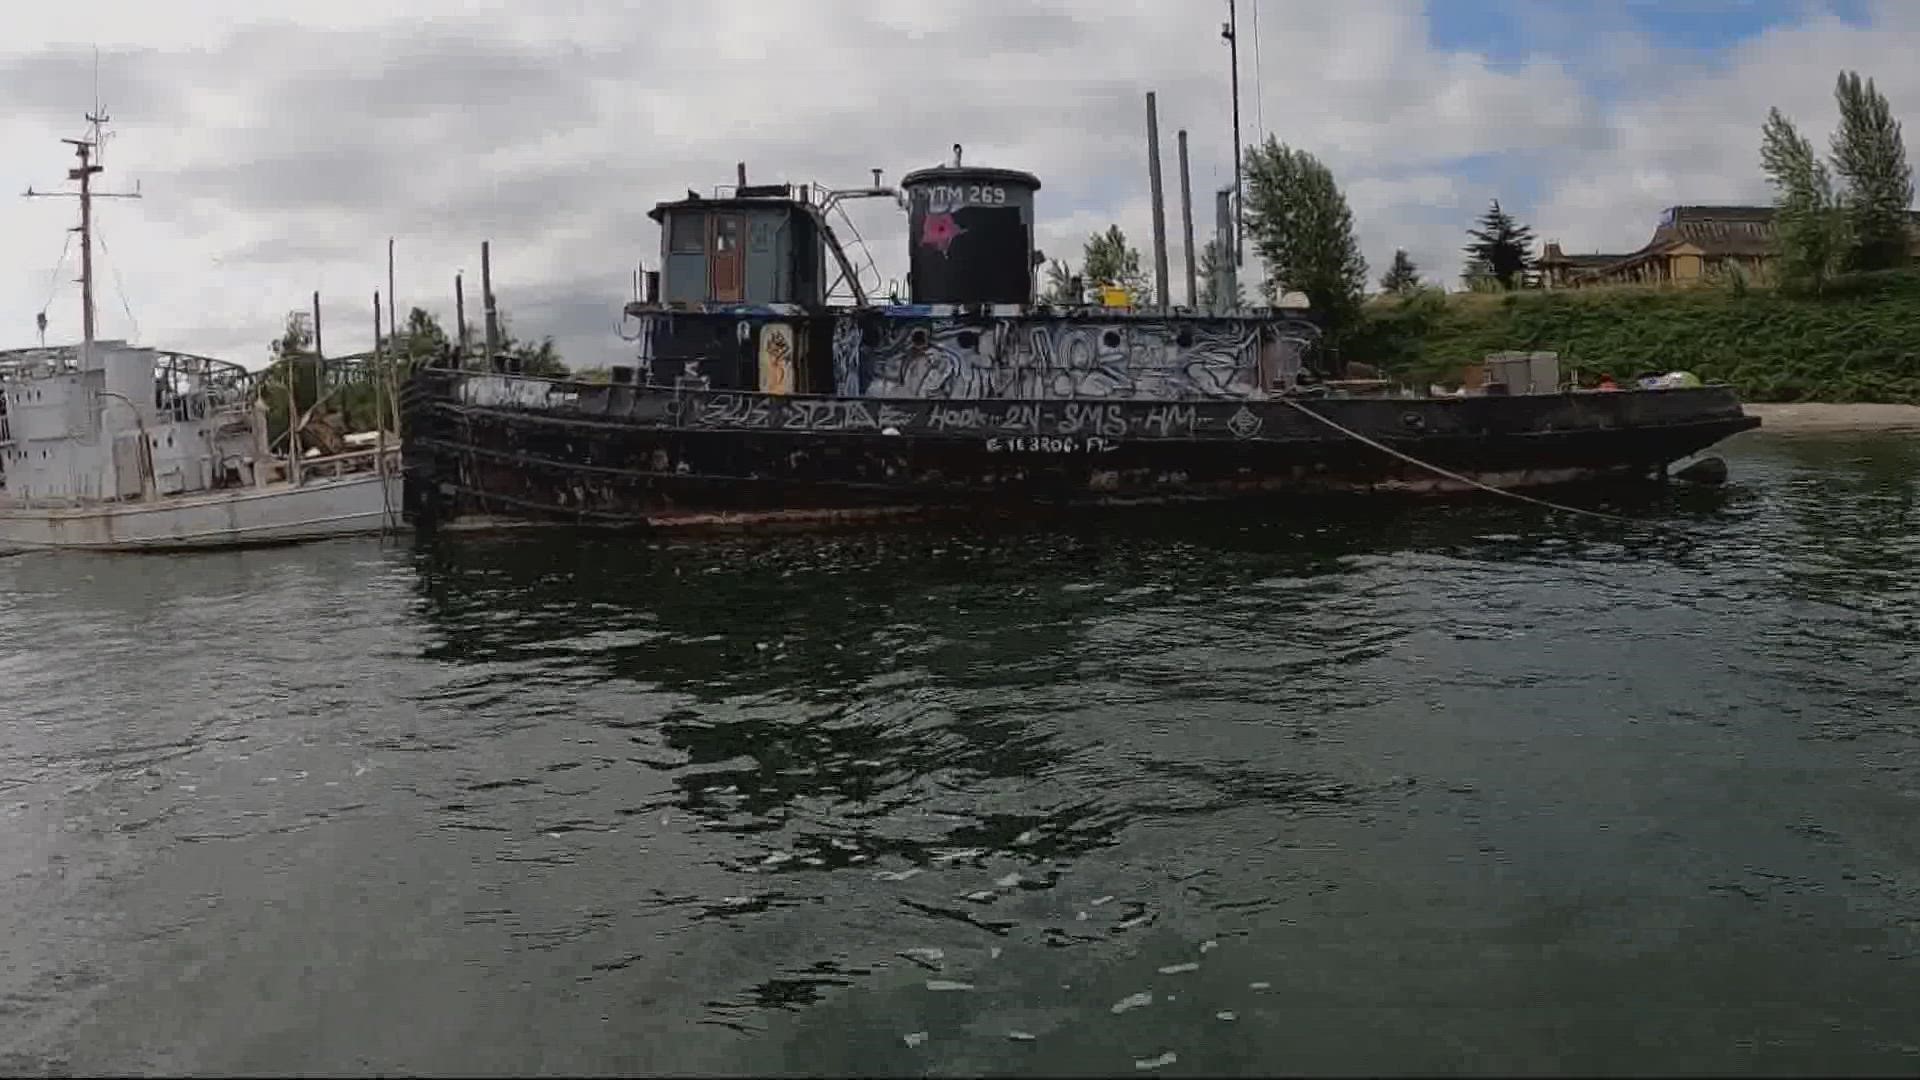 Both ships sank last year after sitting off Hayden Island for more than a decade. Officials have already had to remove thousands of gallons of diesel fuel.